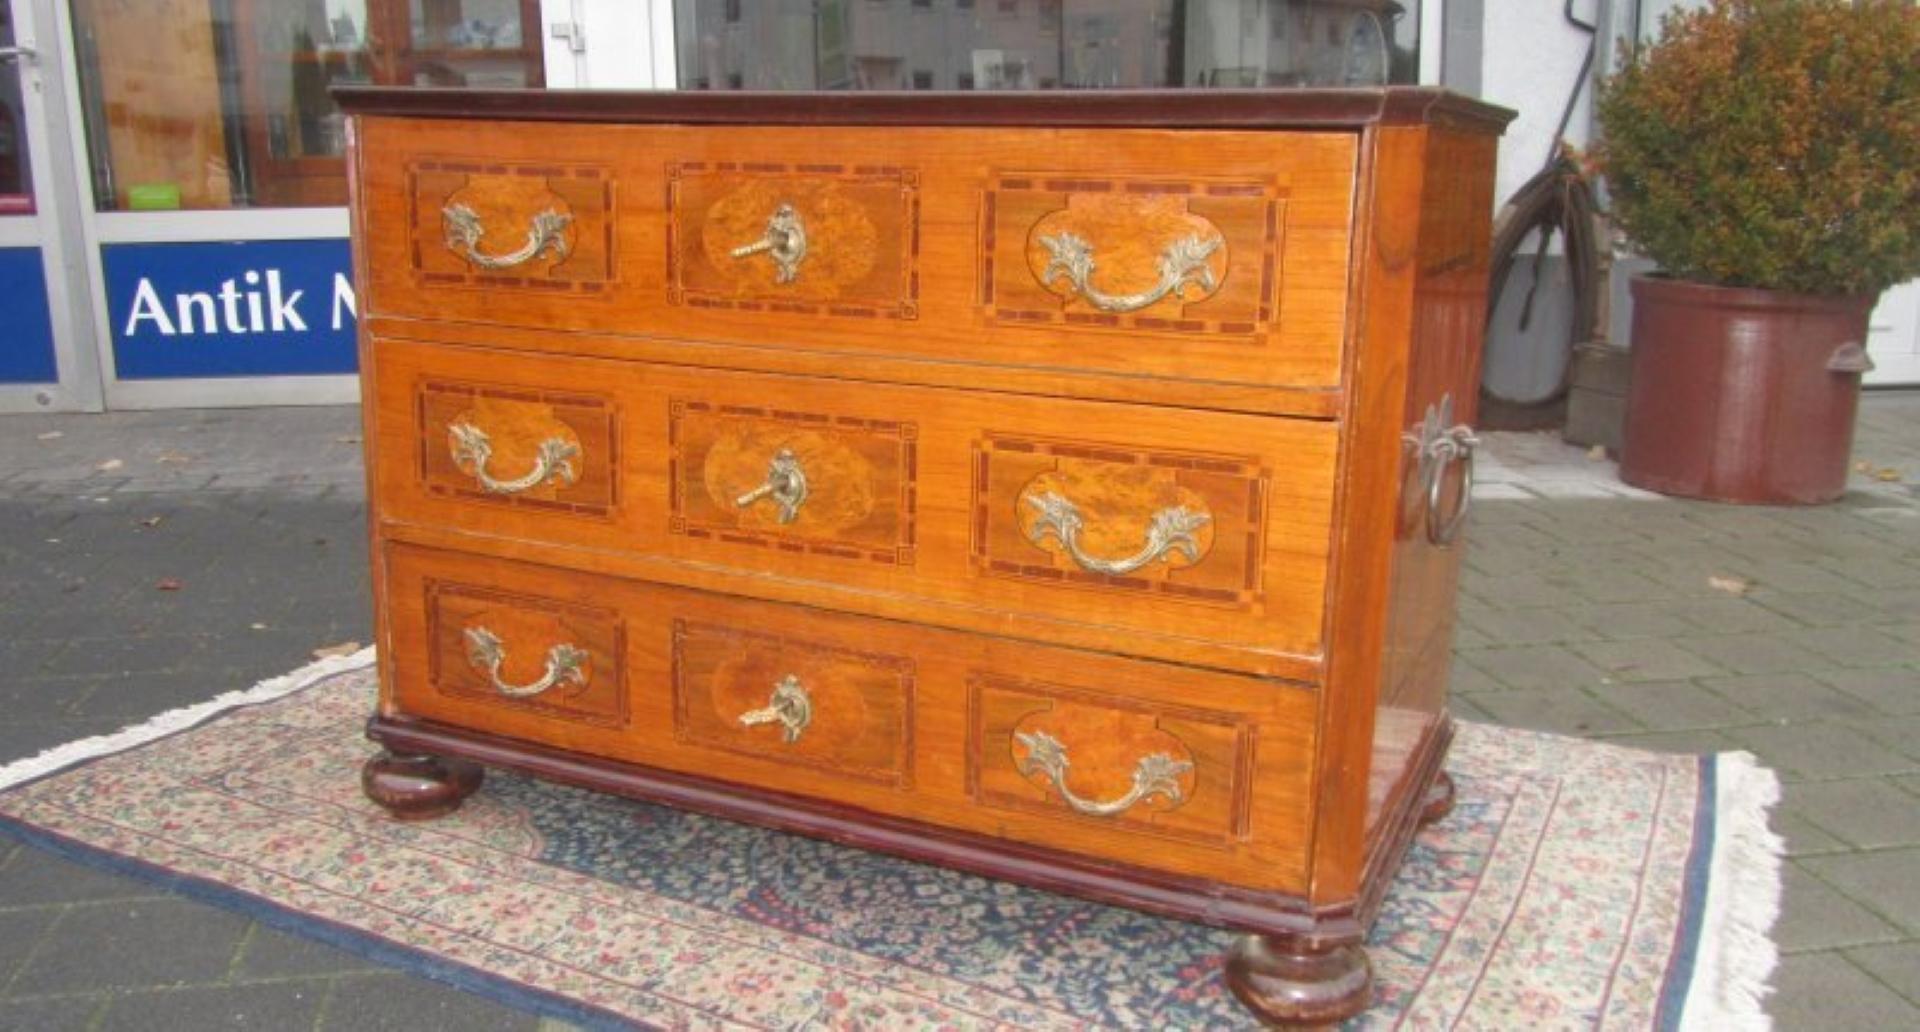 Luxurious antique Baroque commode or chest of drawers made of oakwood veneer as well as birch wood and mahogany inlay works. An elegant masterpiece from the 1790s with original brass handles, original locks and keys. Perfect restored condition with